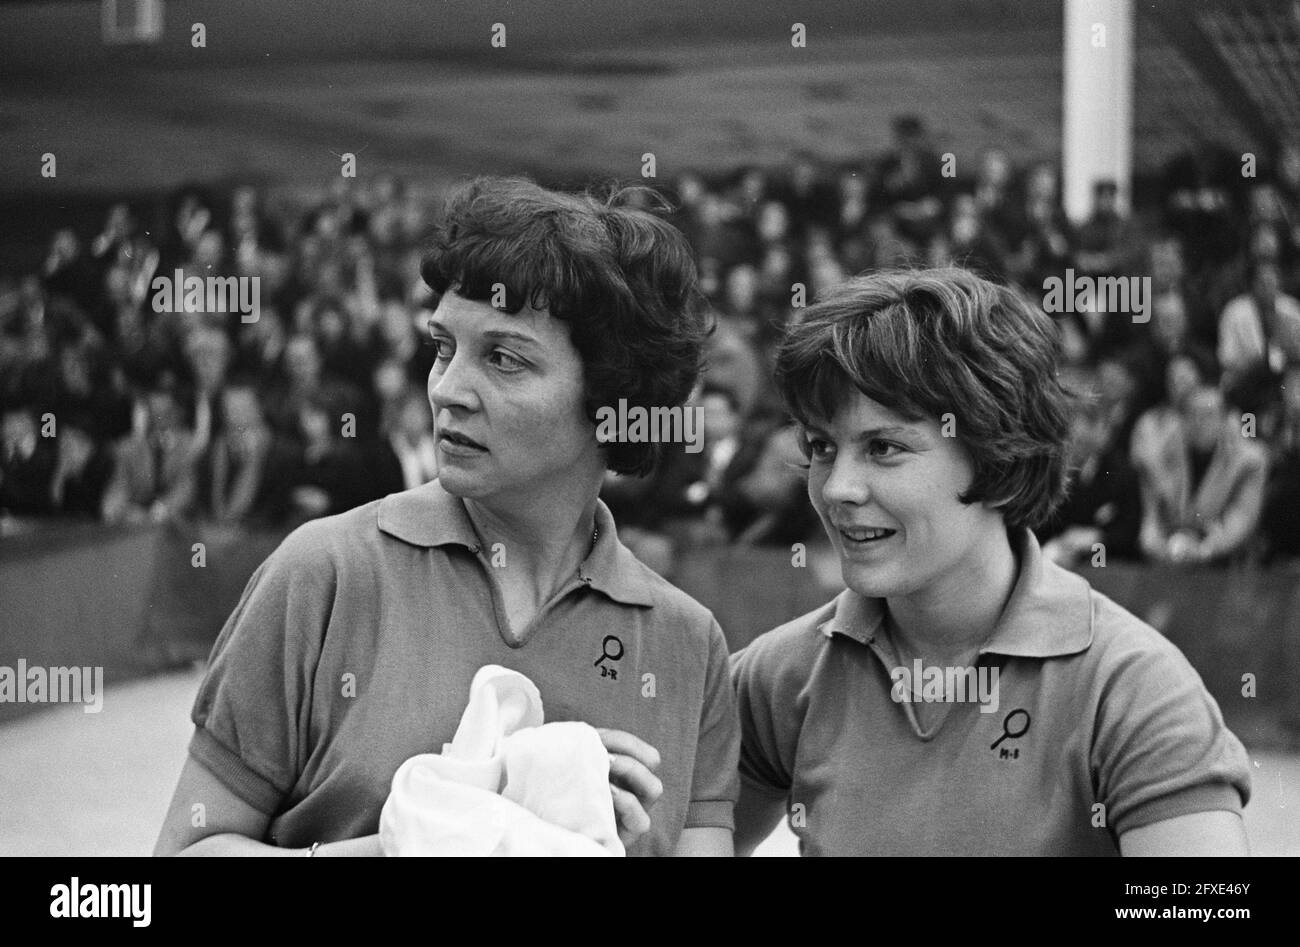 Table tennis championships in Utrecht. International tournament number 14 Diana Rowe and Miss Shannon (15+16), October 6, 1963, Table tennis, championships, tournaments, The Netherlands, 20th century press agency photo, news to remember, documentary, historic photography 1945-1990, visual stories, human history of the Twentieth Century, capturing moments in time Stock Photo